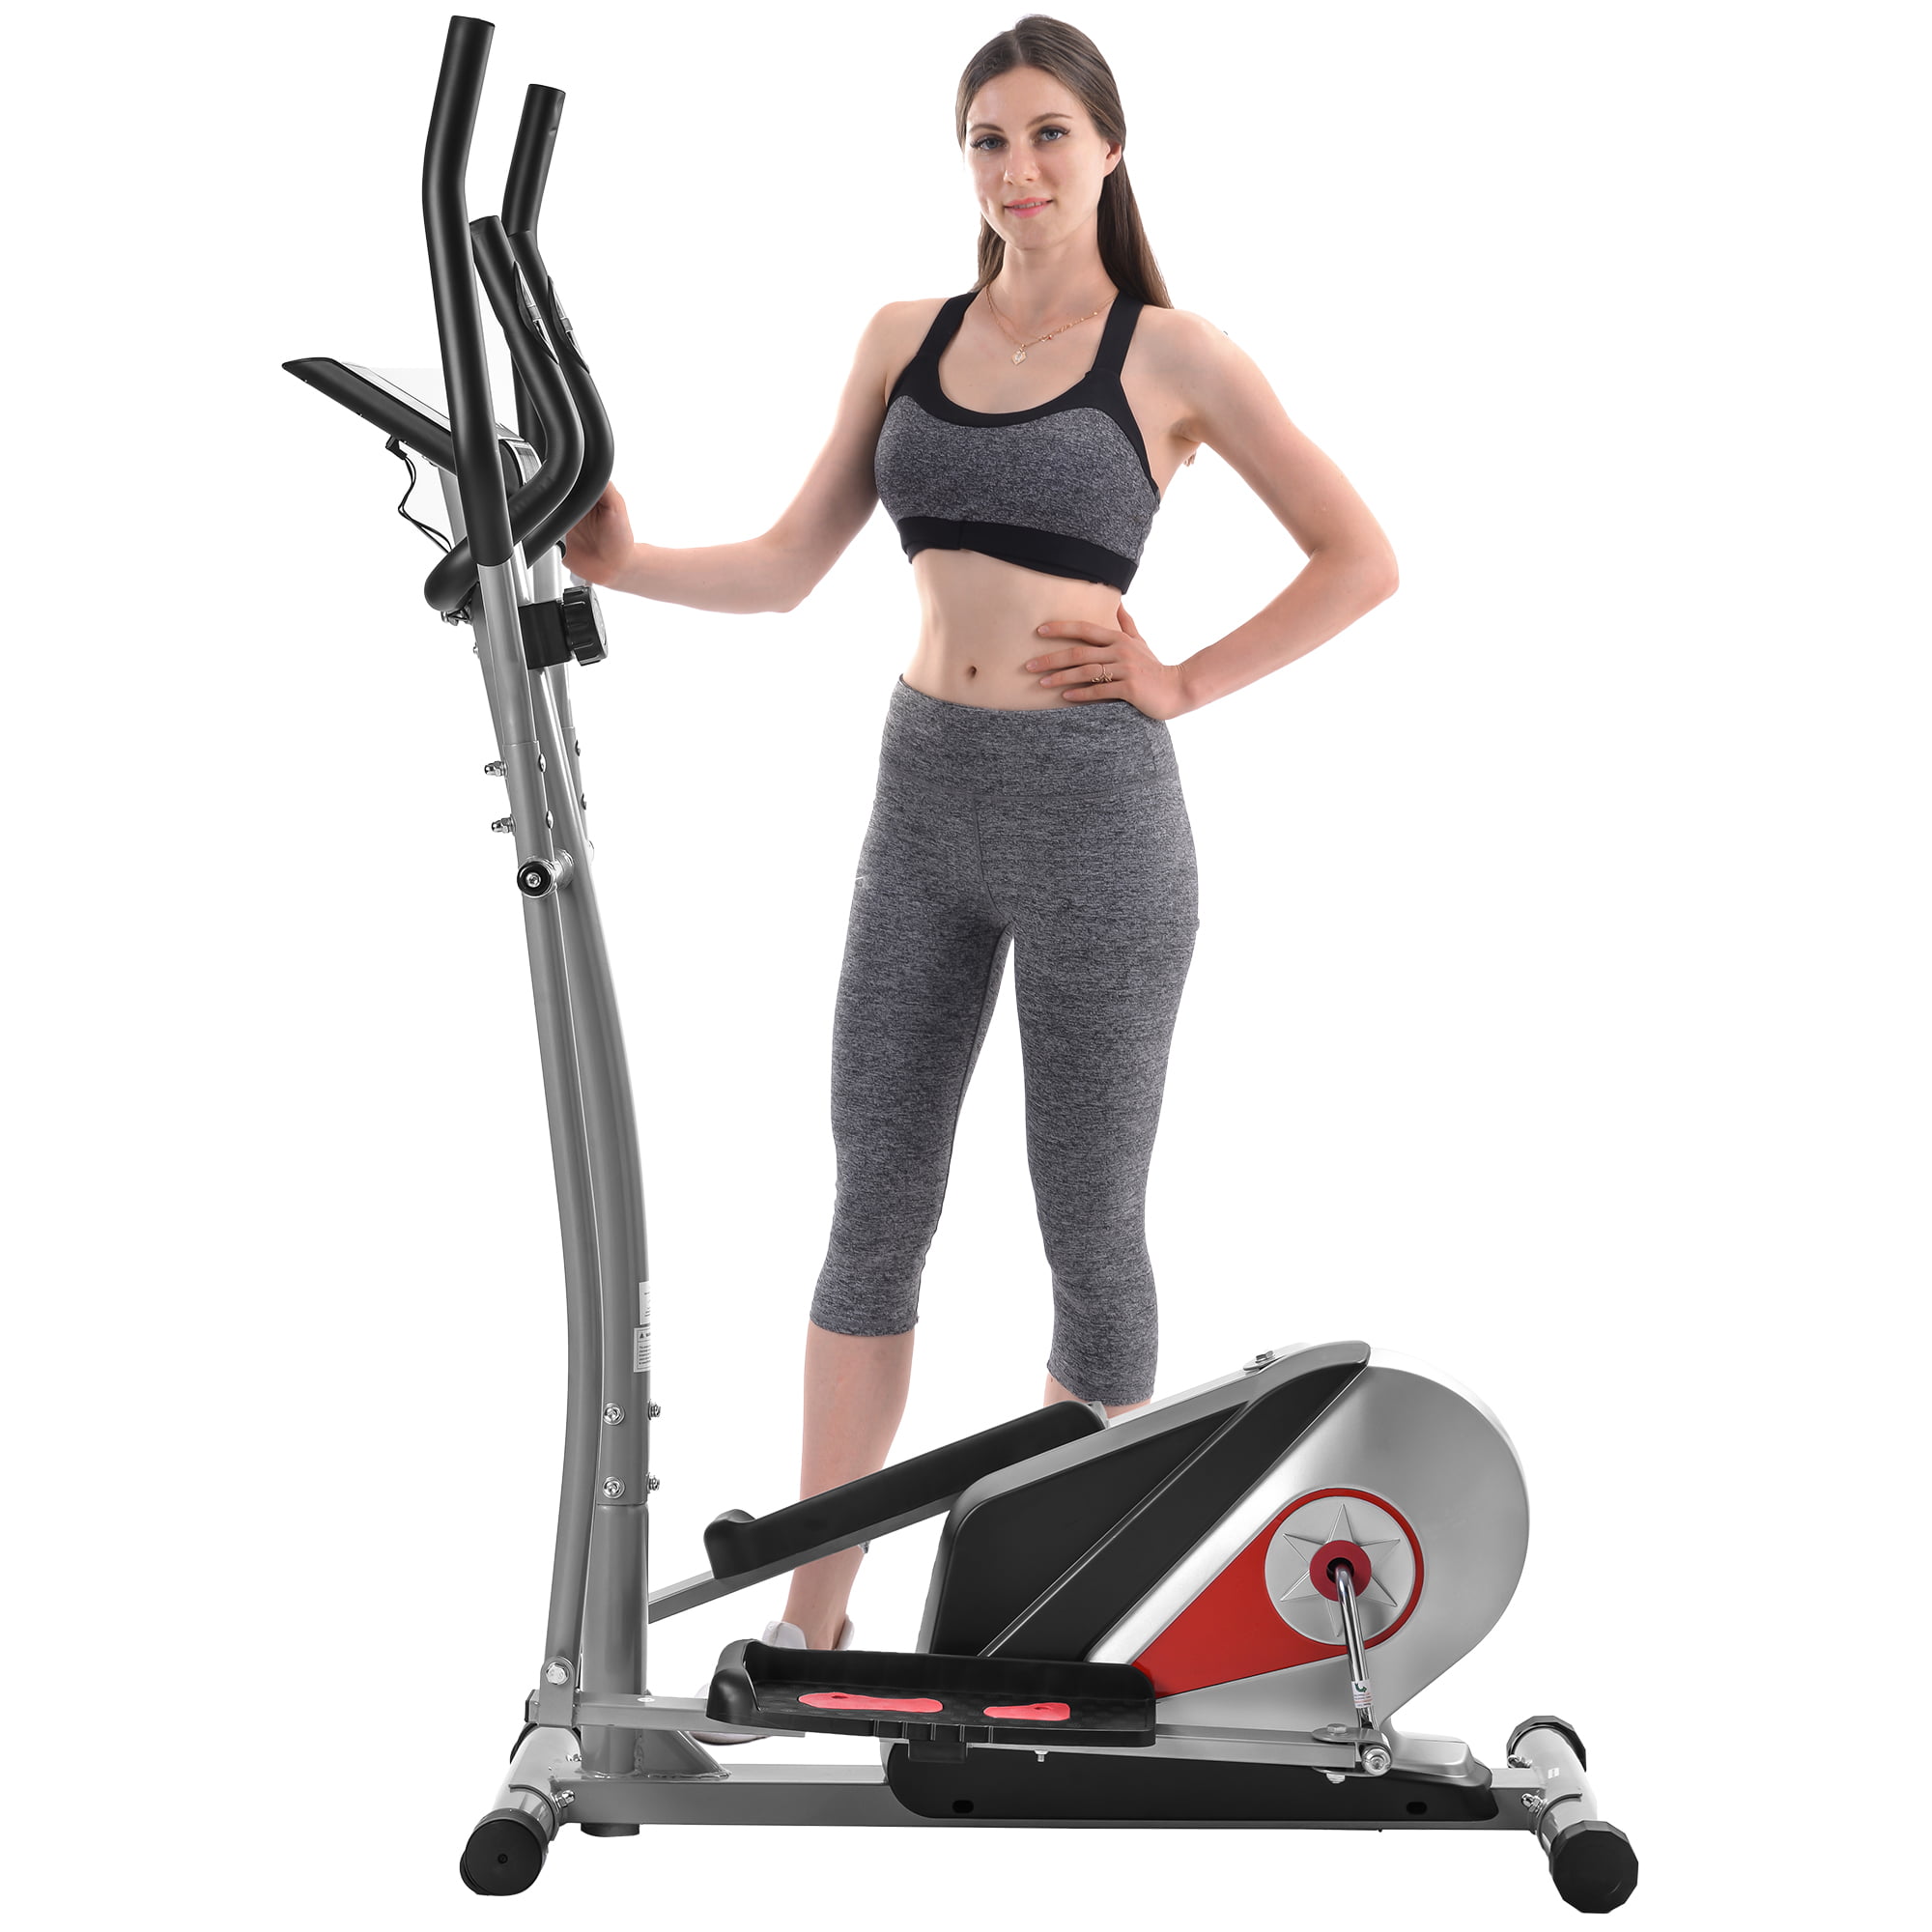 Details about   Elliptical Machine Trainer Magnetic Quiet Driven with LCD Monitor Home Use US 